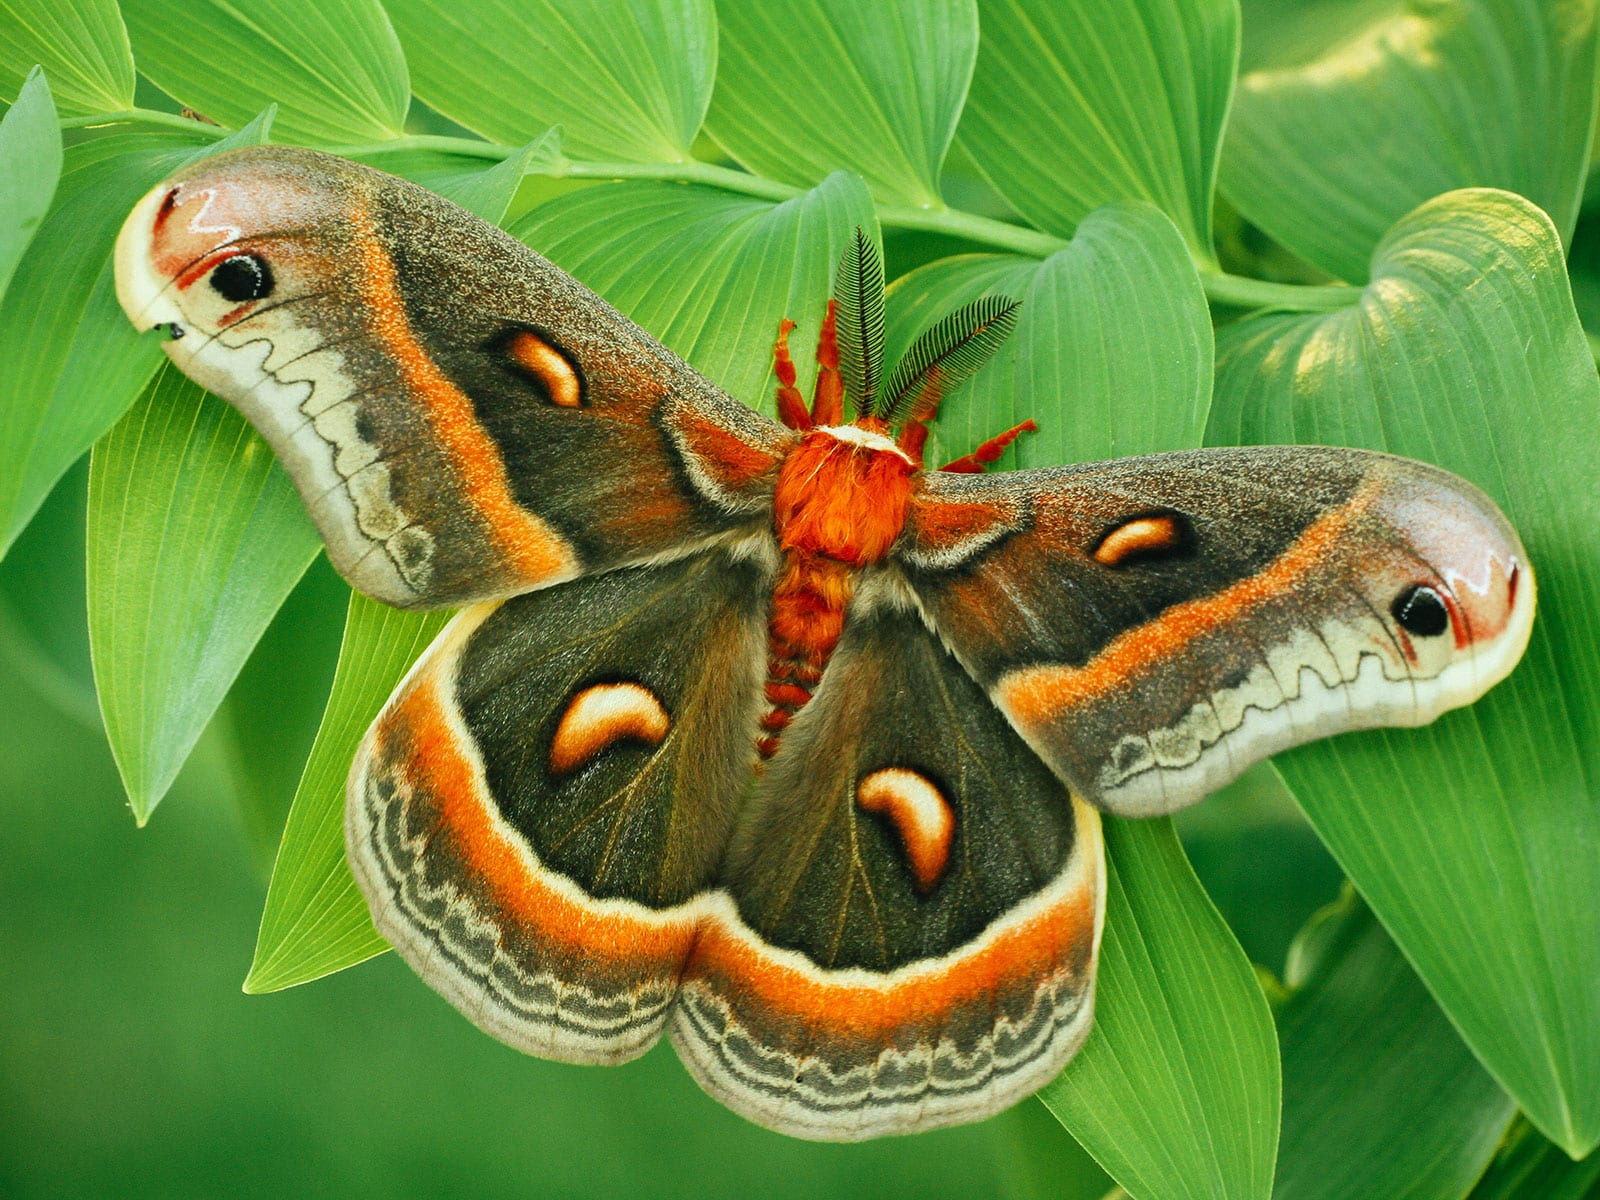 Cecropia moth sitting on a lush green stem full of leaves